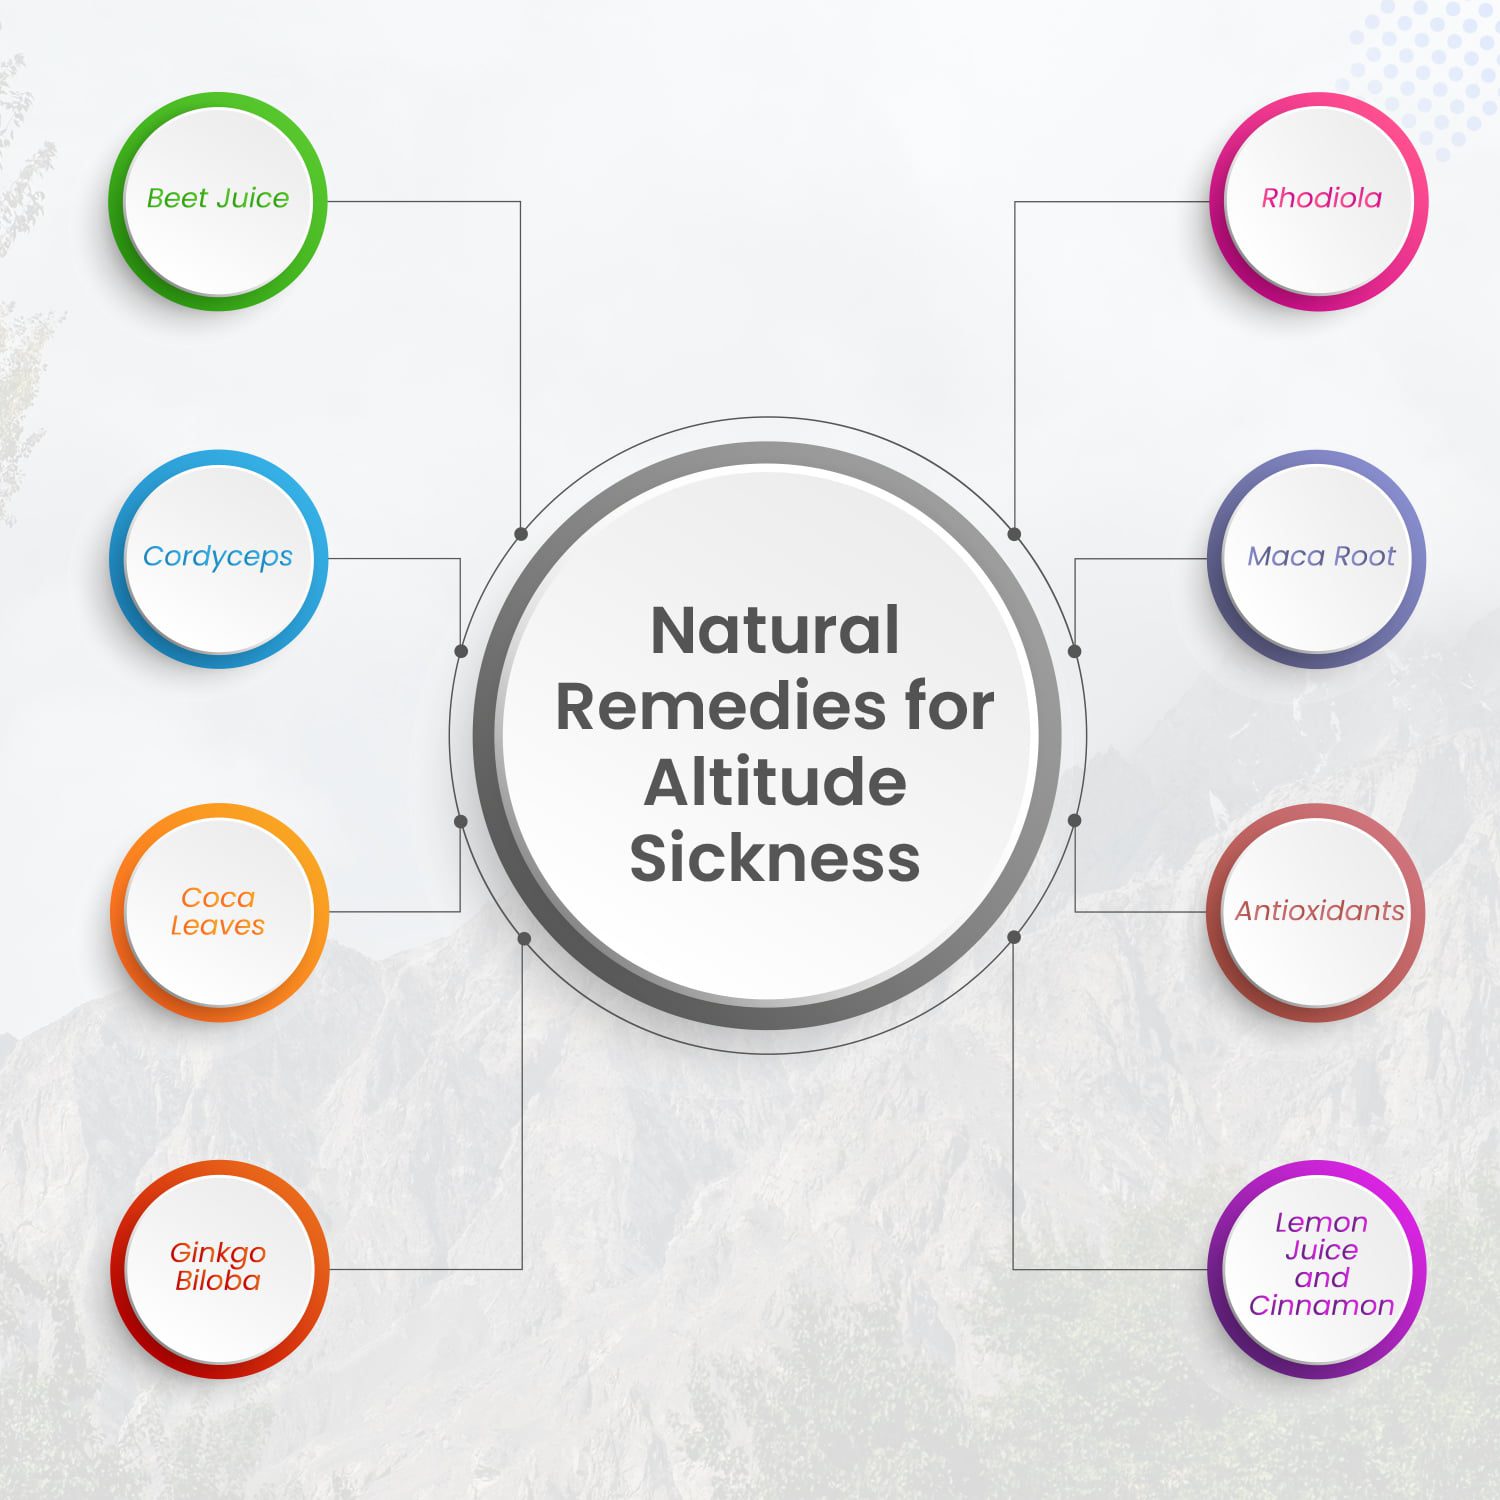 Best Remedy for Altitude Sickness | Natural Remedies Altitude Sickness